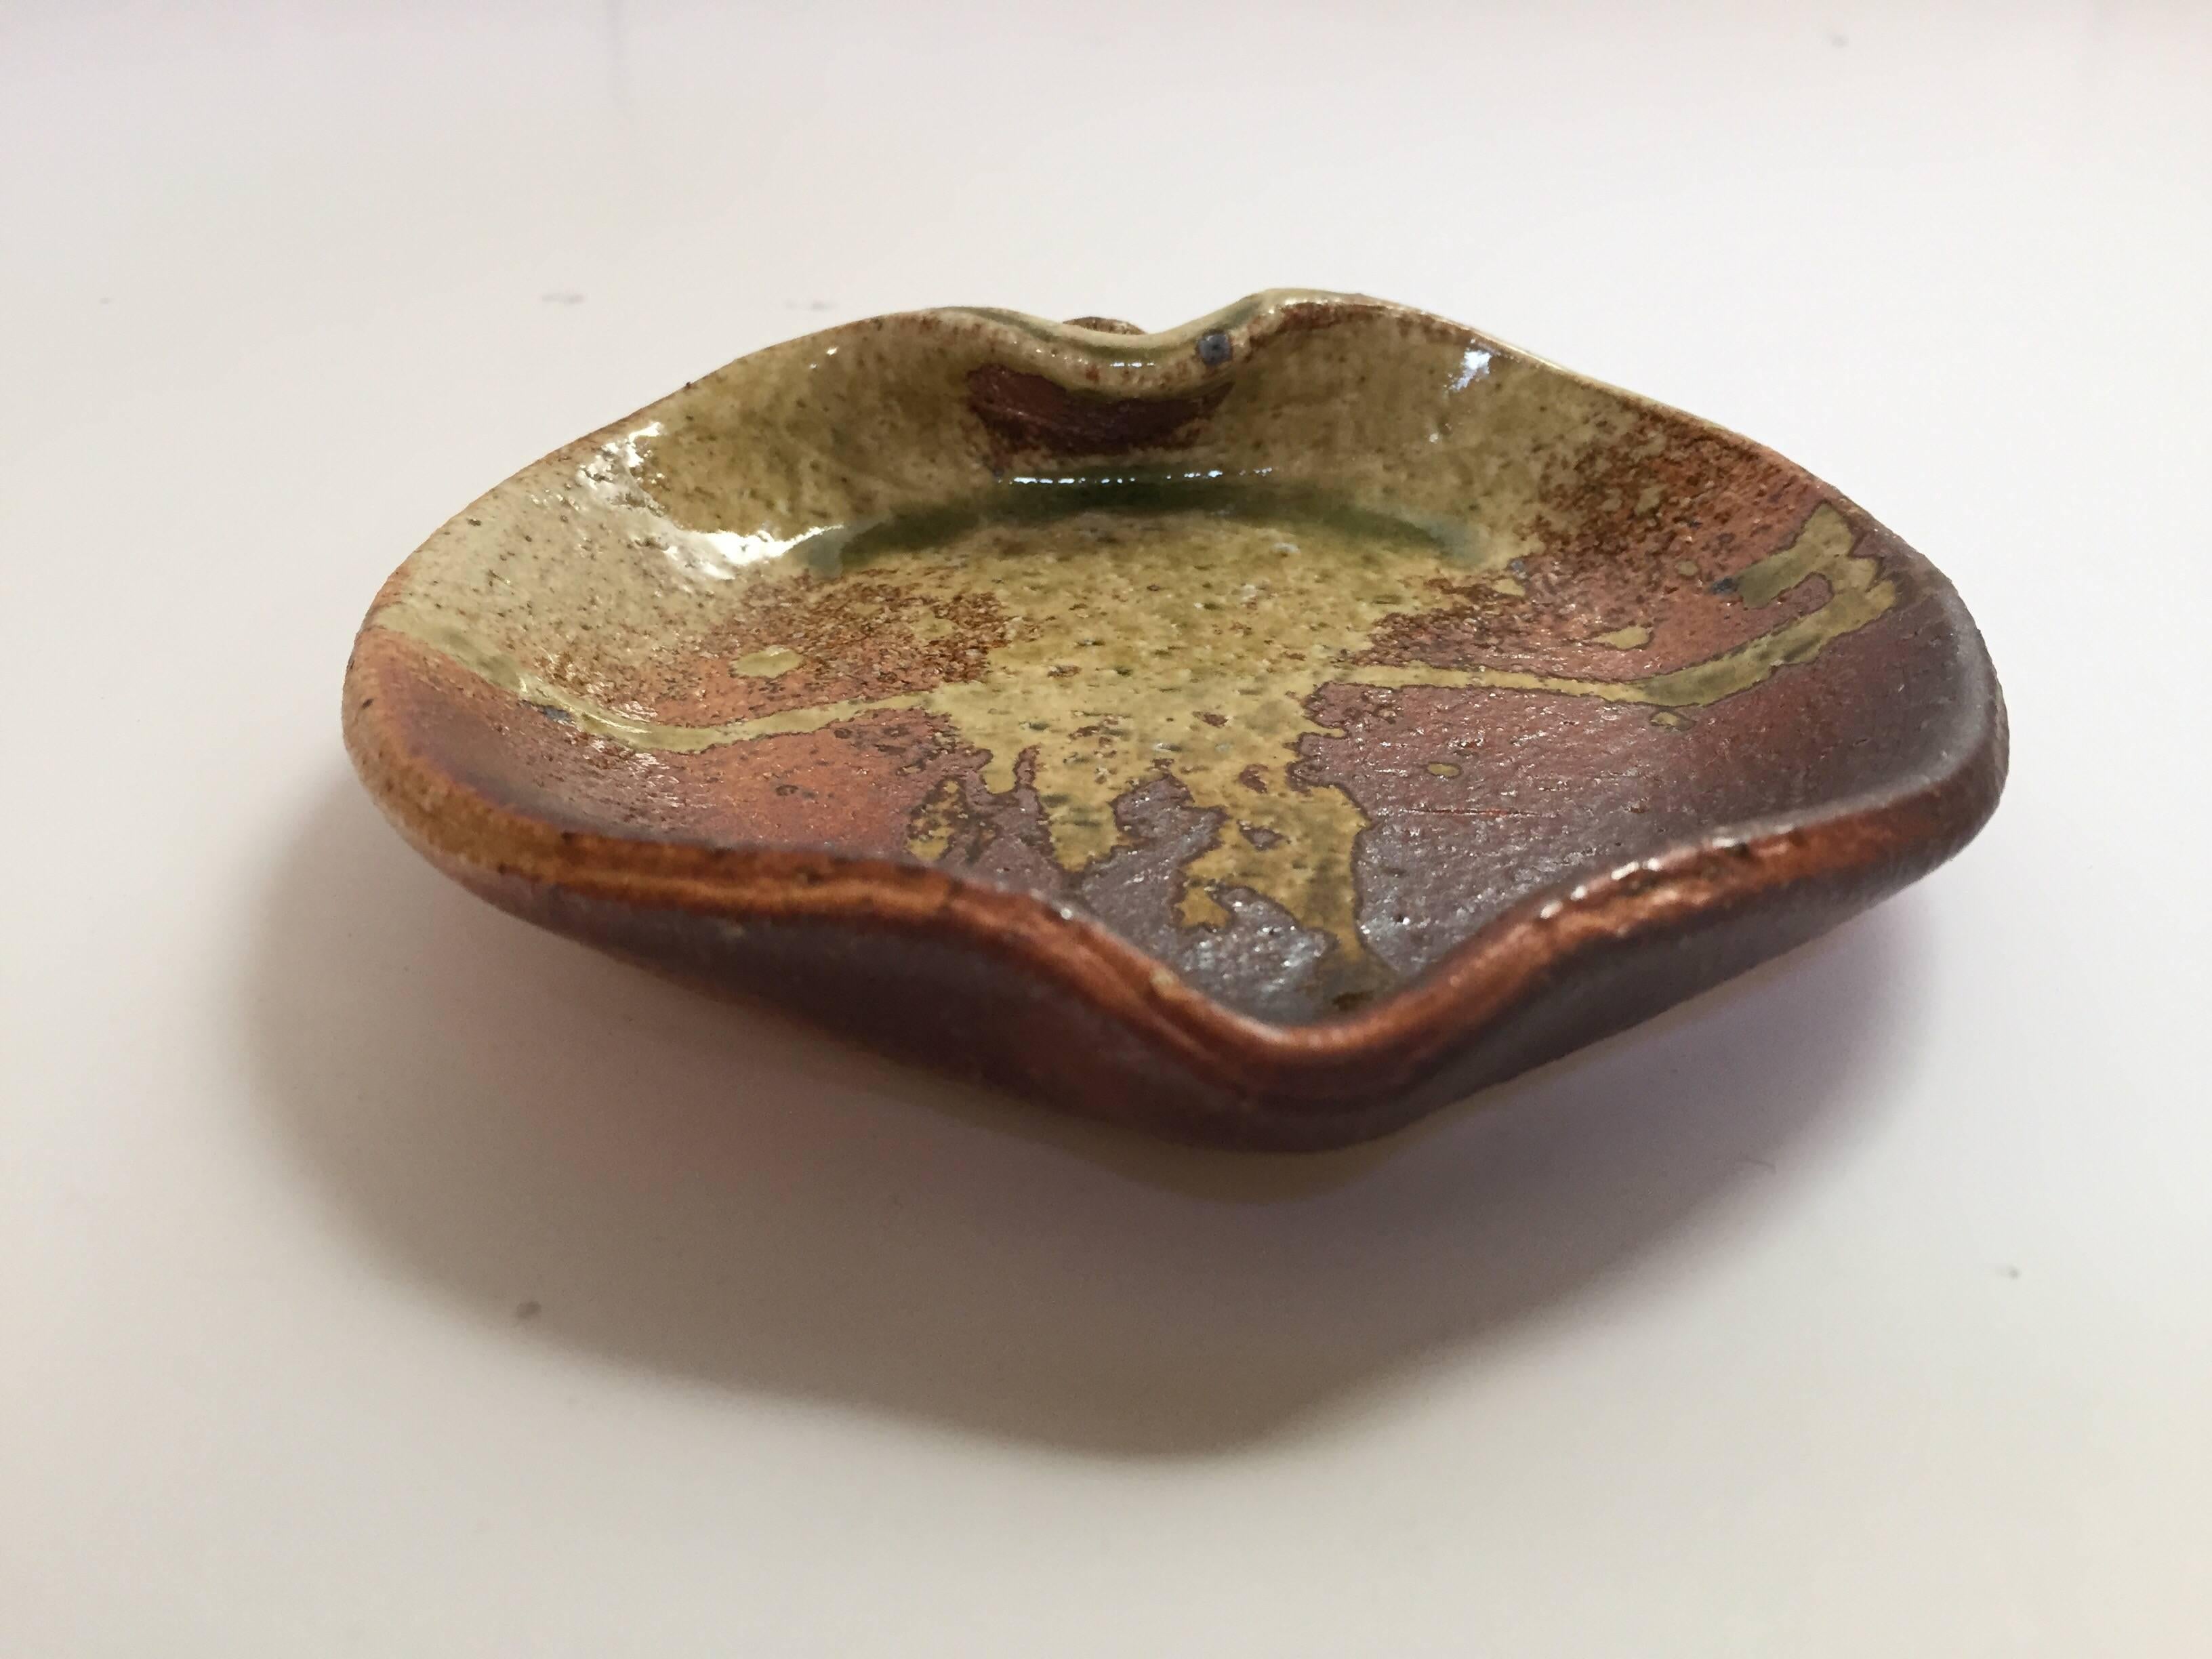 Set of six earth tone colors ceramic stoneware ashtray pottery glazed in form of leaves.
Great to use as ashtrays or as votive candle holders or just decorative artifacts.
Each plate is unique and textured in a different glazed shades of green and